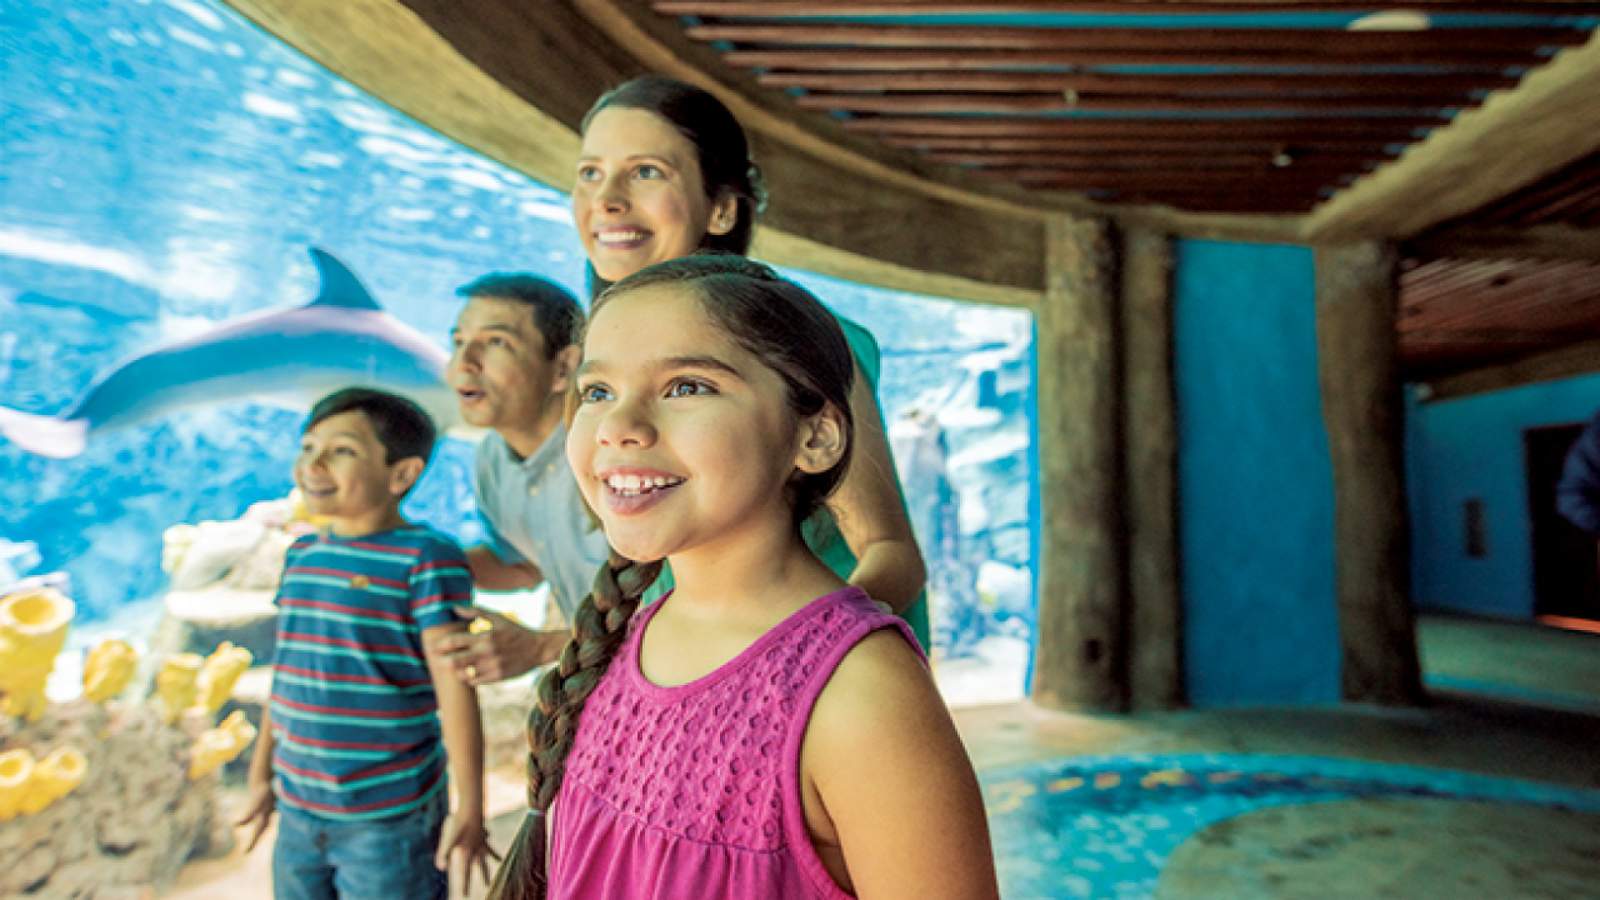 Aquatica is now open with enhanced health, safety protocols in place; SeaWorld is next